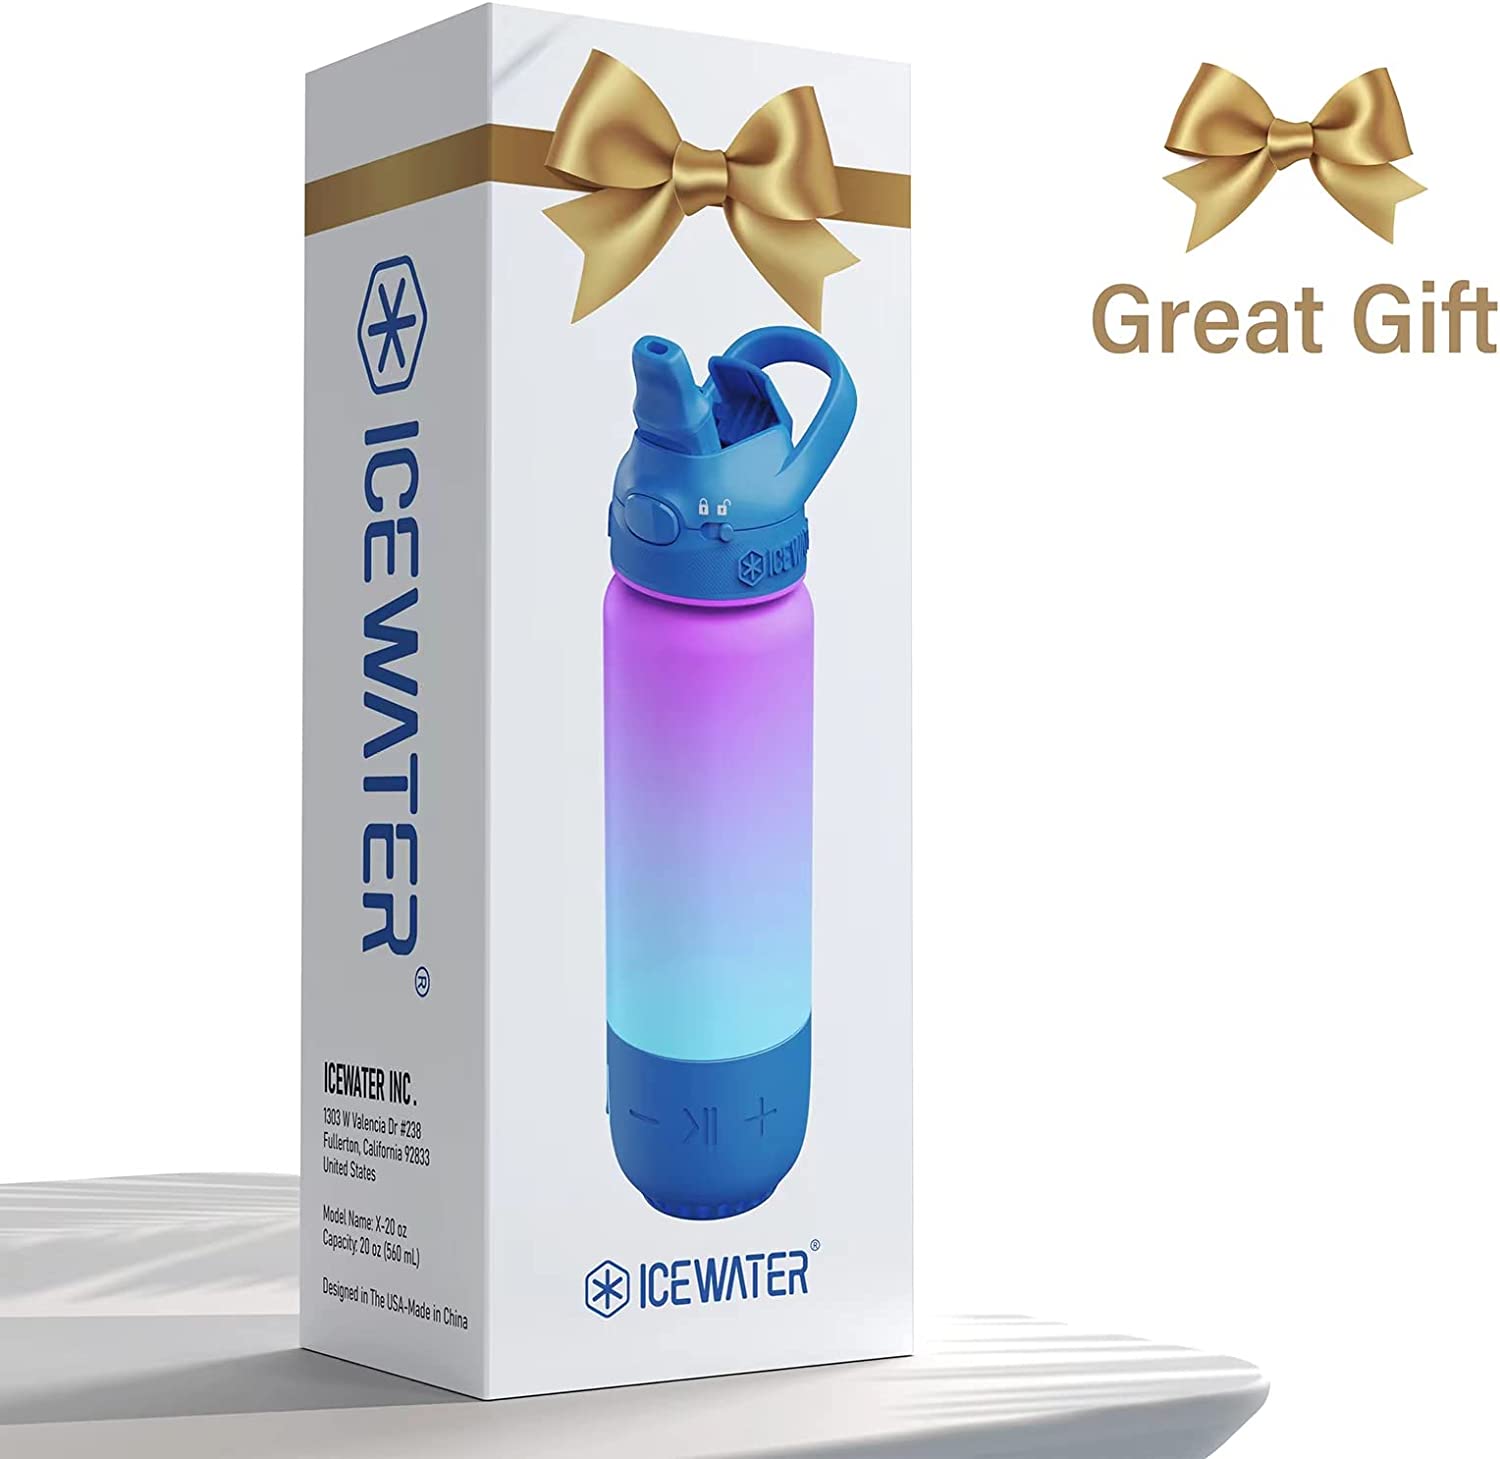 ICEWATER 3-in-1 Bluetooth Speaker+Smart Water Bottle+Dancing Lights, Portable Wireless Speaker, Glows to Remind You to Keep Hydrated, 20 oz, Auto Straw Lid, Leak-proof (Blue)